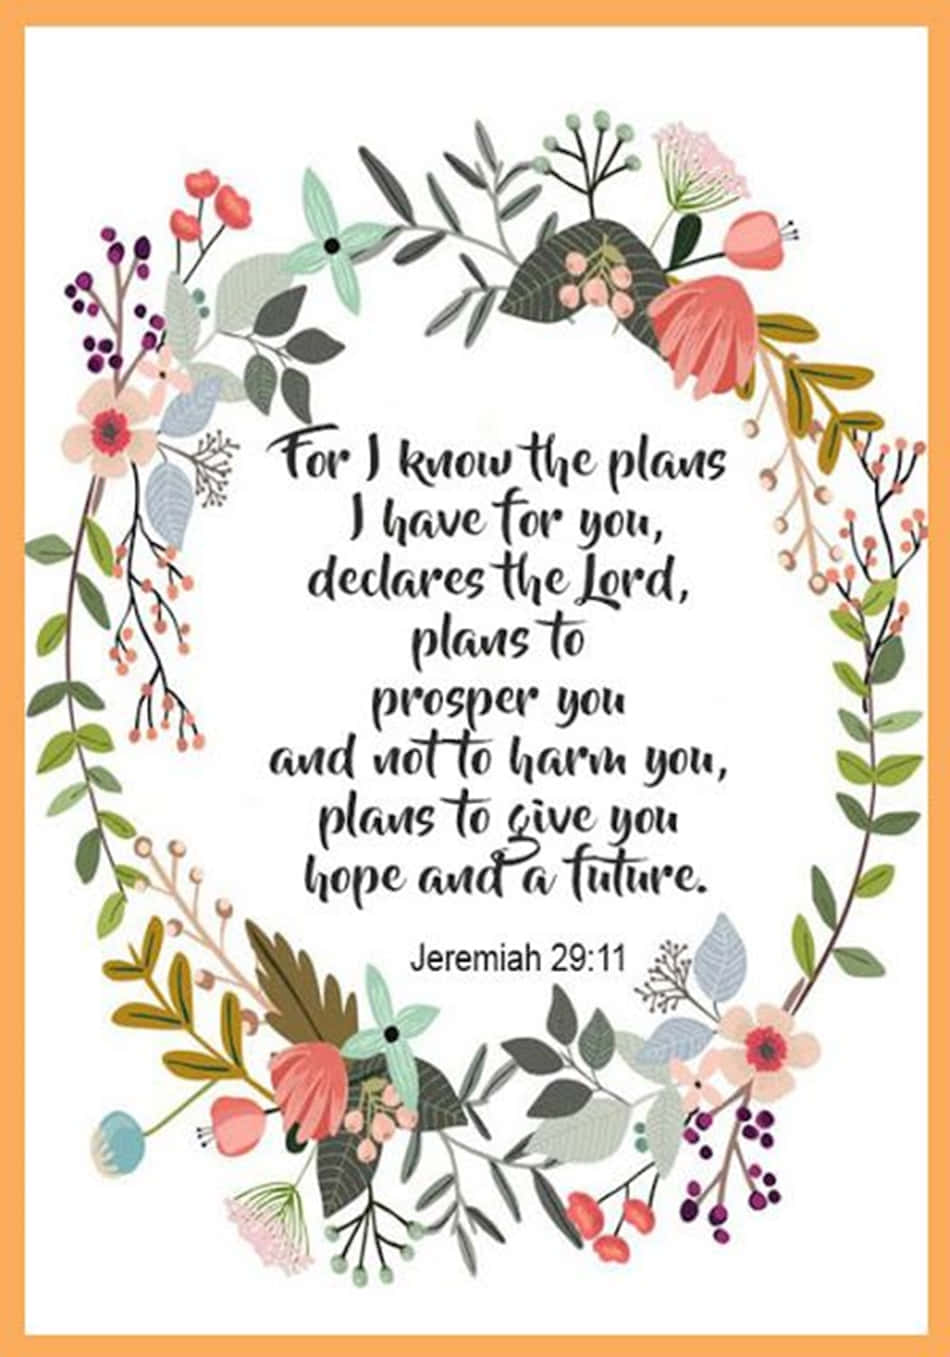 "For I know the plans I have for you,” says the Lord. “They are plans for good and not for disaster, to give you a future and a hope." - Jeremiah 29:11 Wallpaper